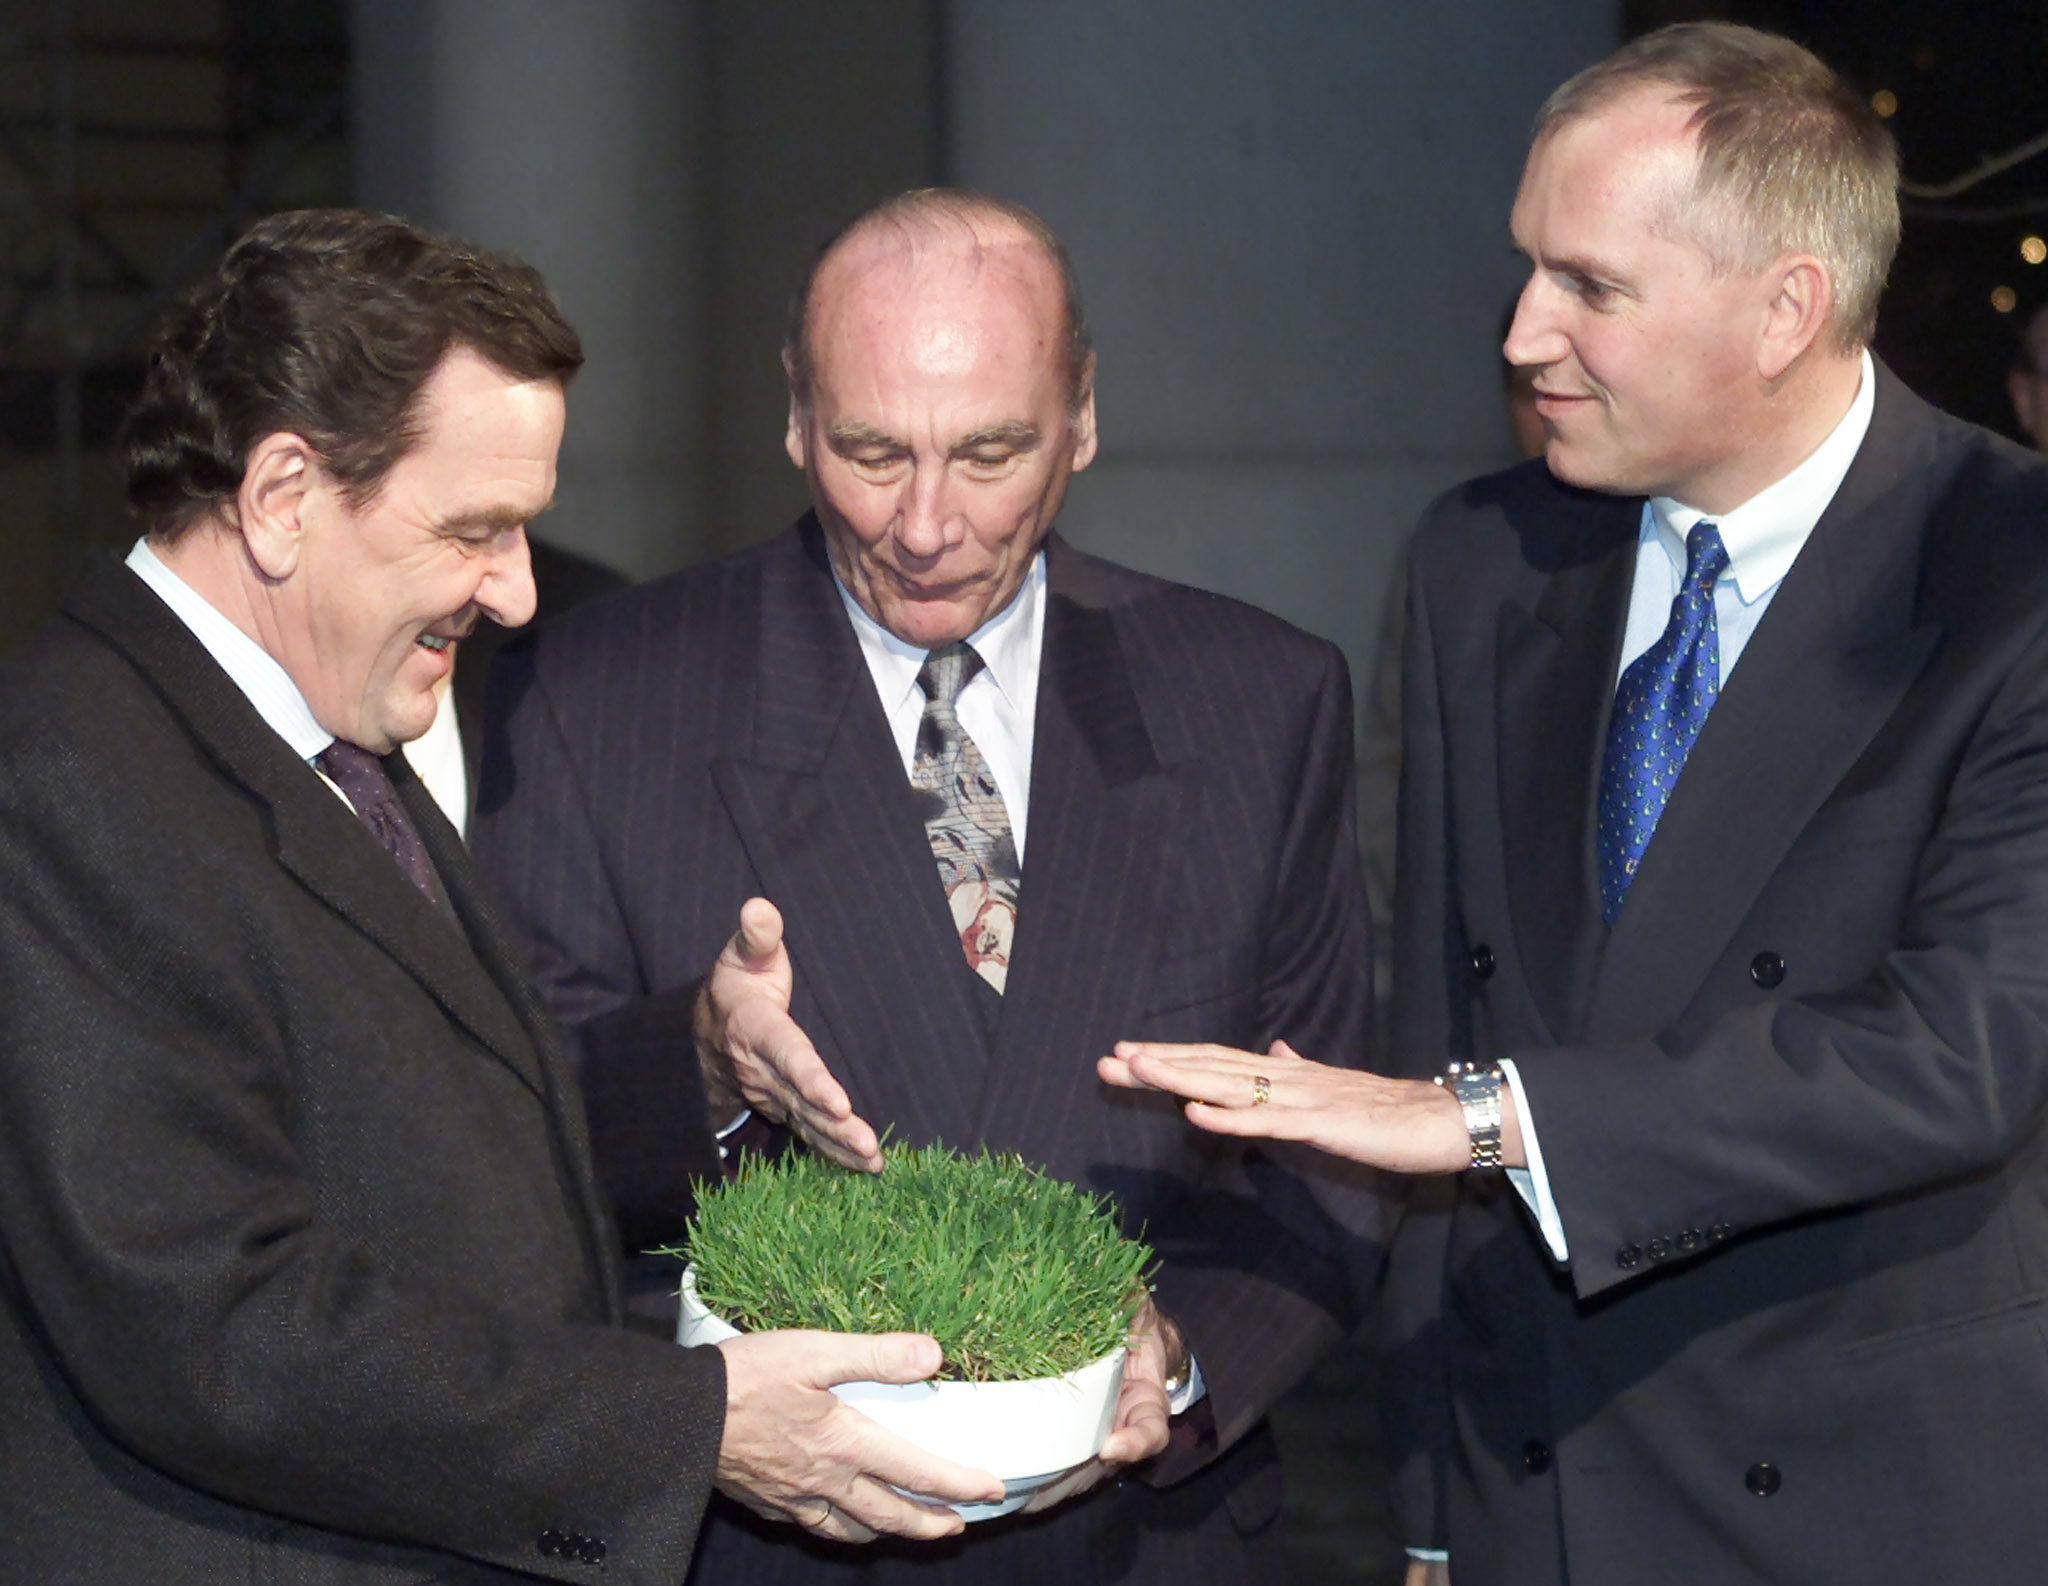 Swiss ambassador Thomas Borer and former German soccer player Horst Eckel (C) present Germany's Chancellor Gerhard Schroeder a piece of green of the seize of an A4 paper from the Bern Wankdorf stadium in Berlin December 12, 2001.  REUTERS/Tobias Schwarz
